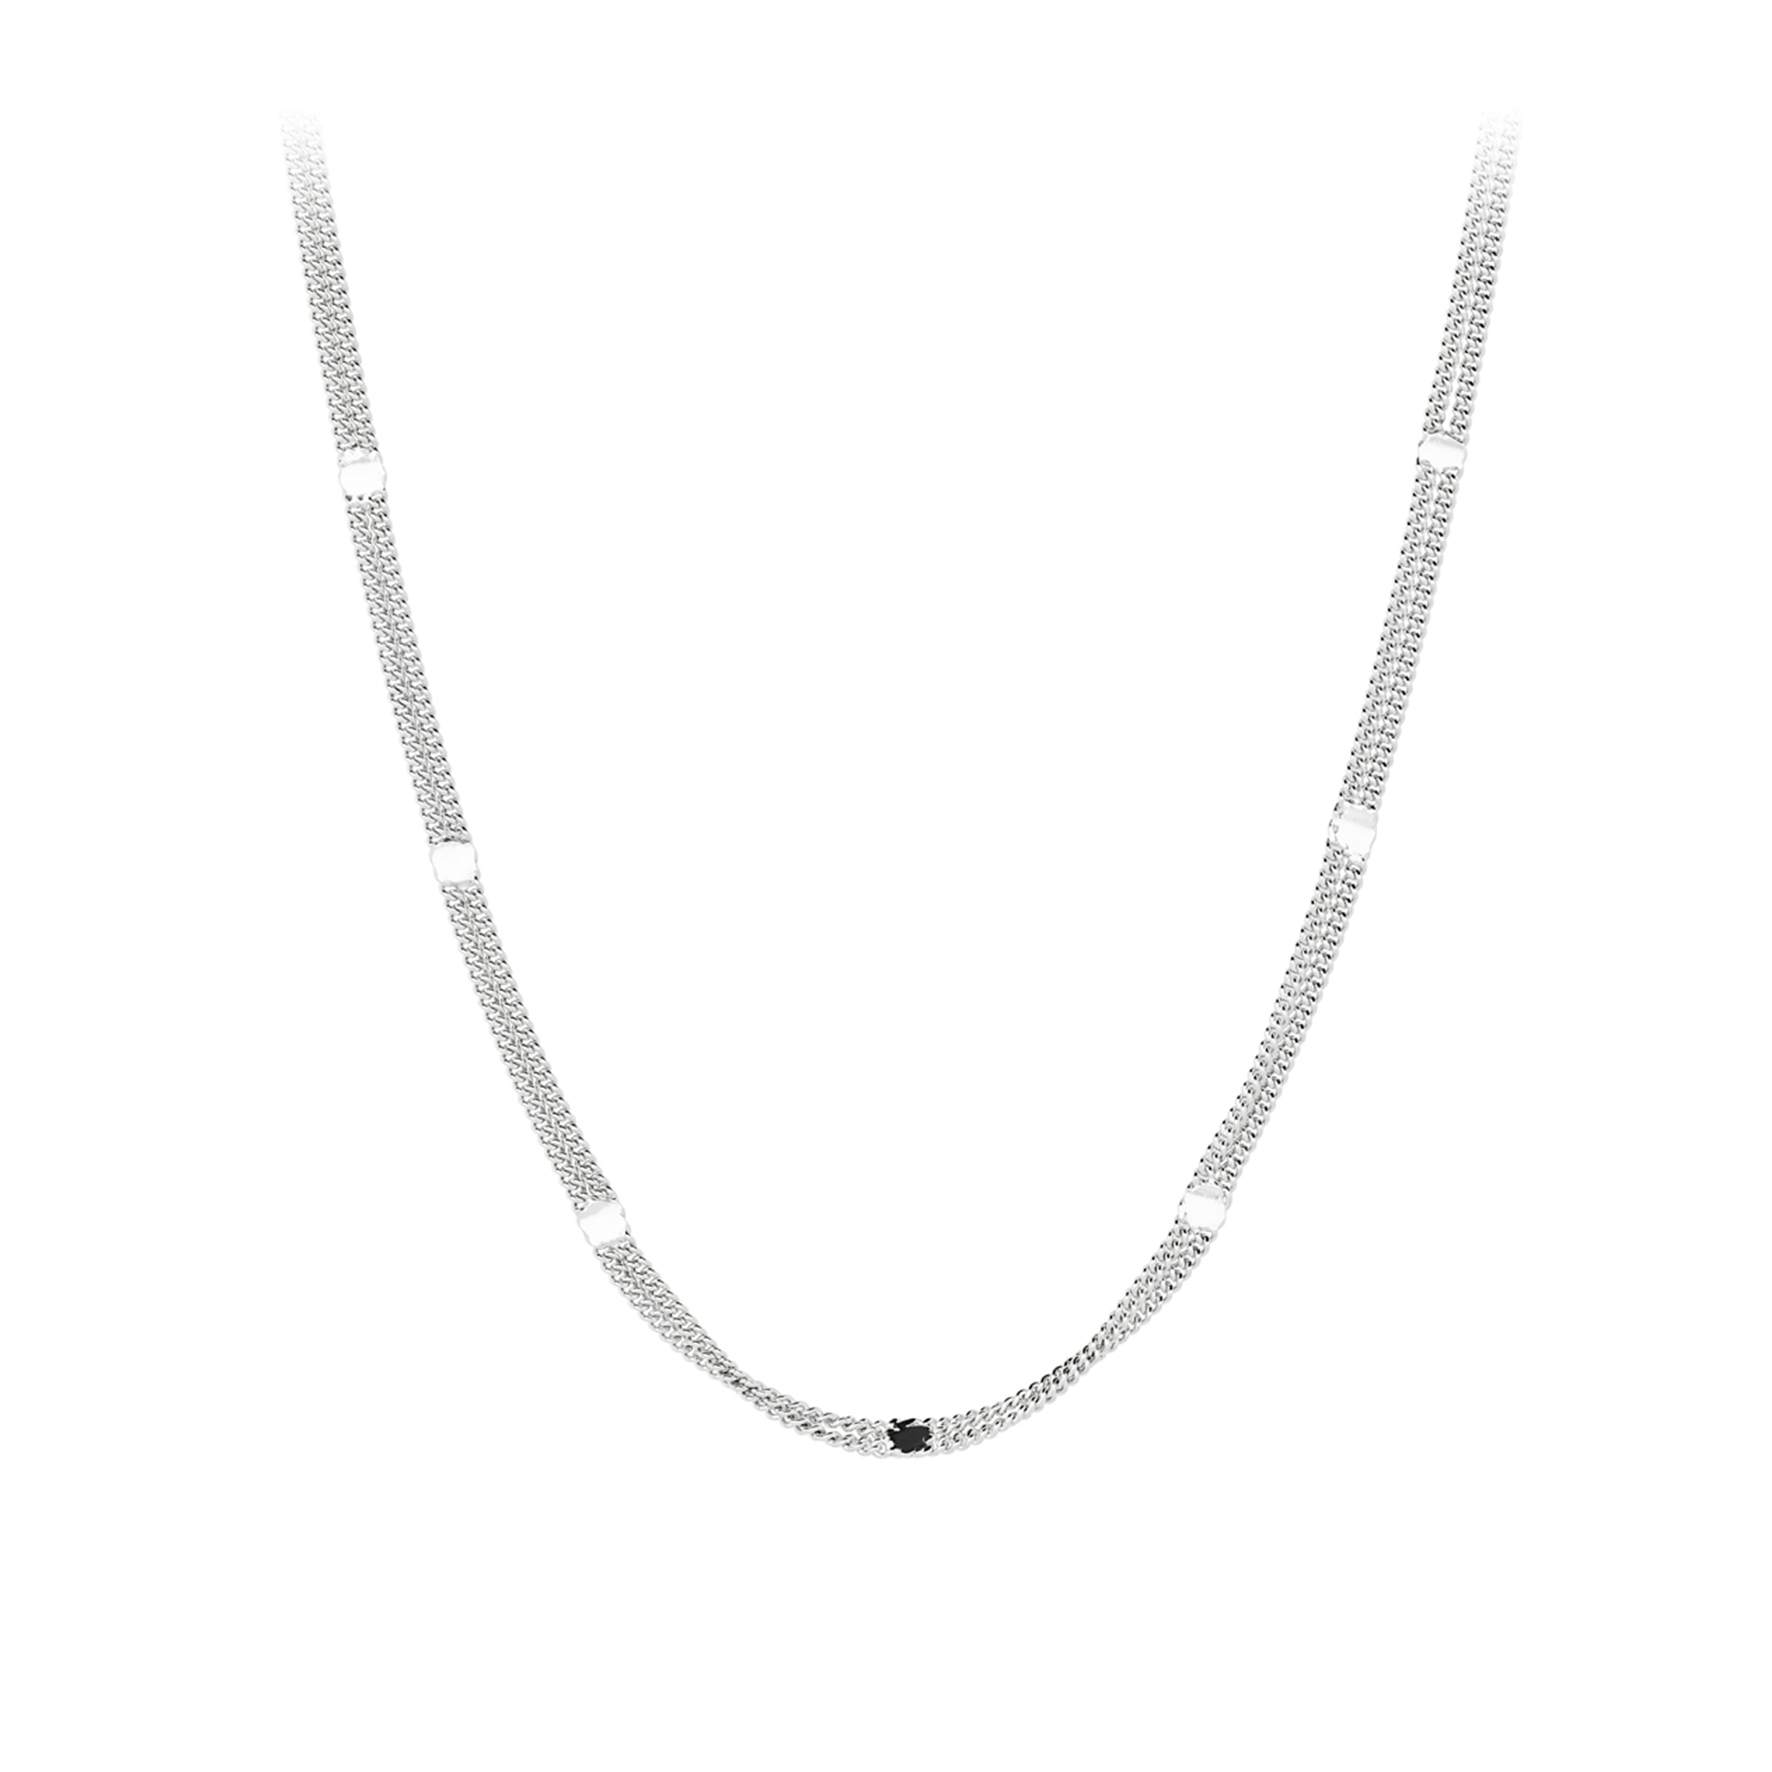 Agnes Necklace from Pernille Corydon in Silver Sterling 925